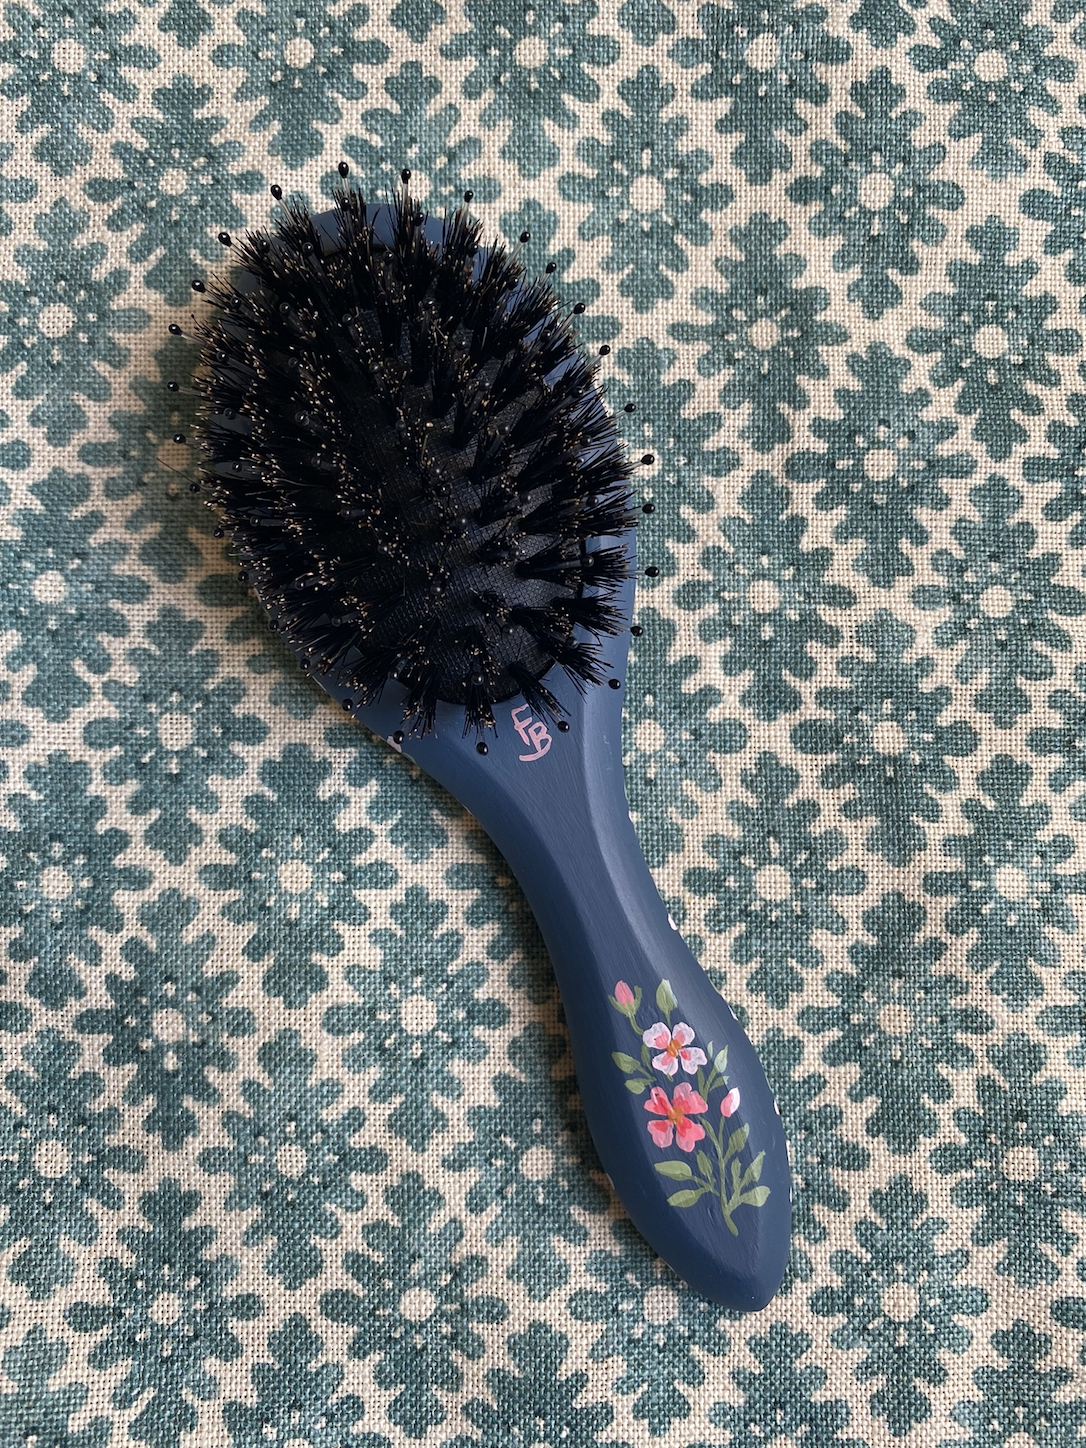 Small hairbrush - Blue with roses